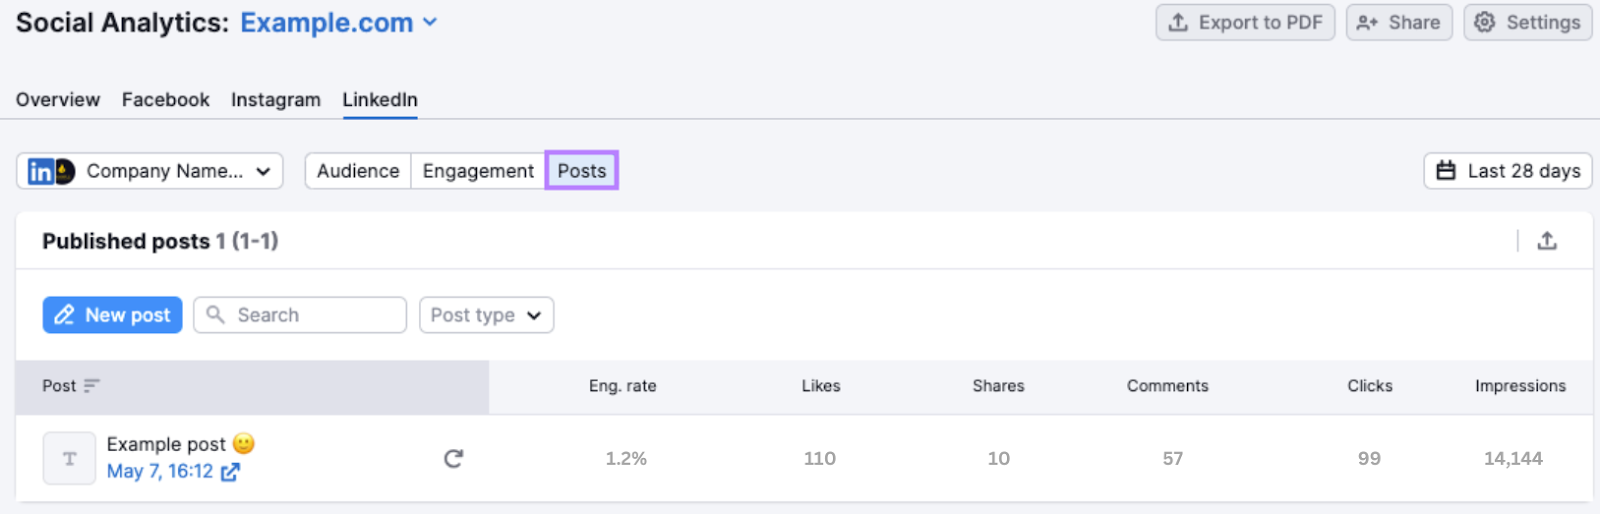 Posts tab of social analytics tool highlighted with example post data